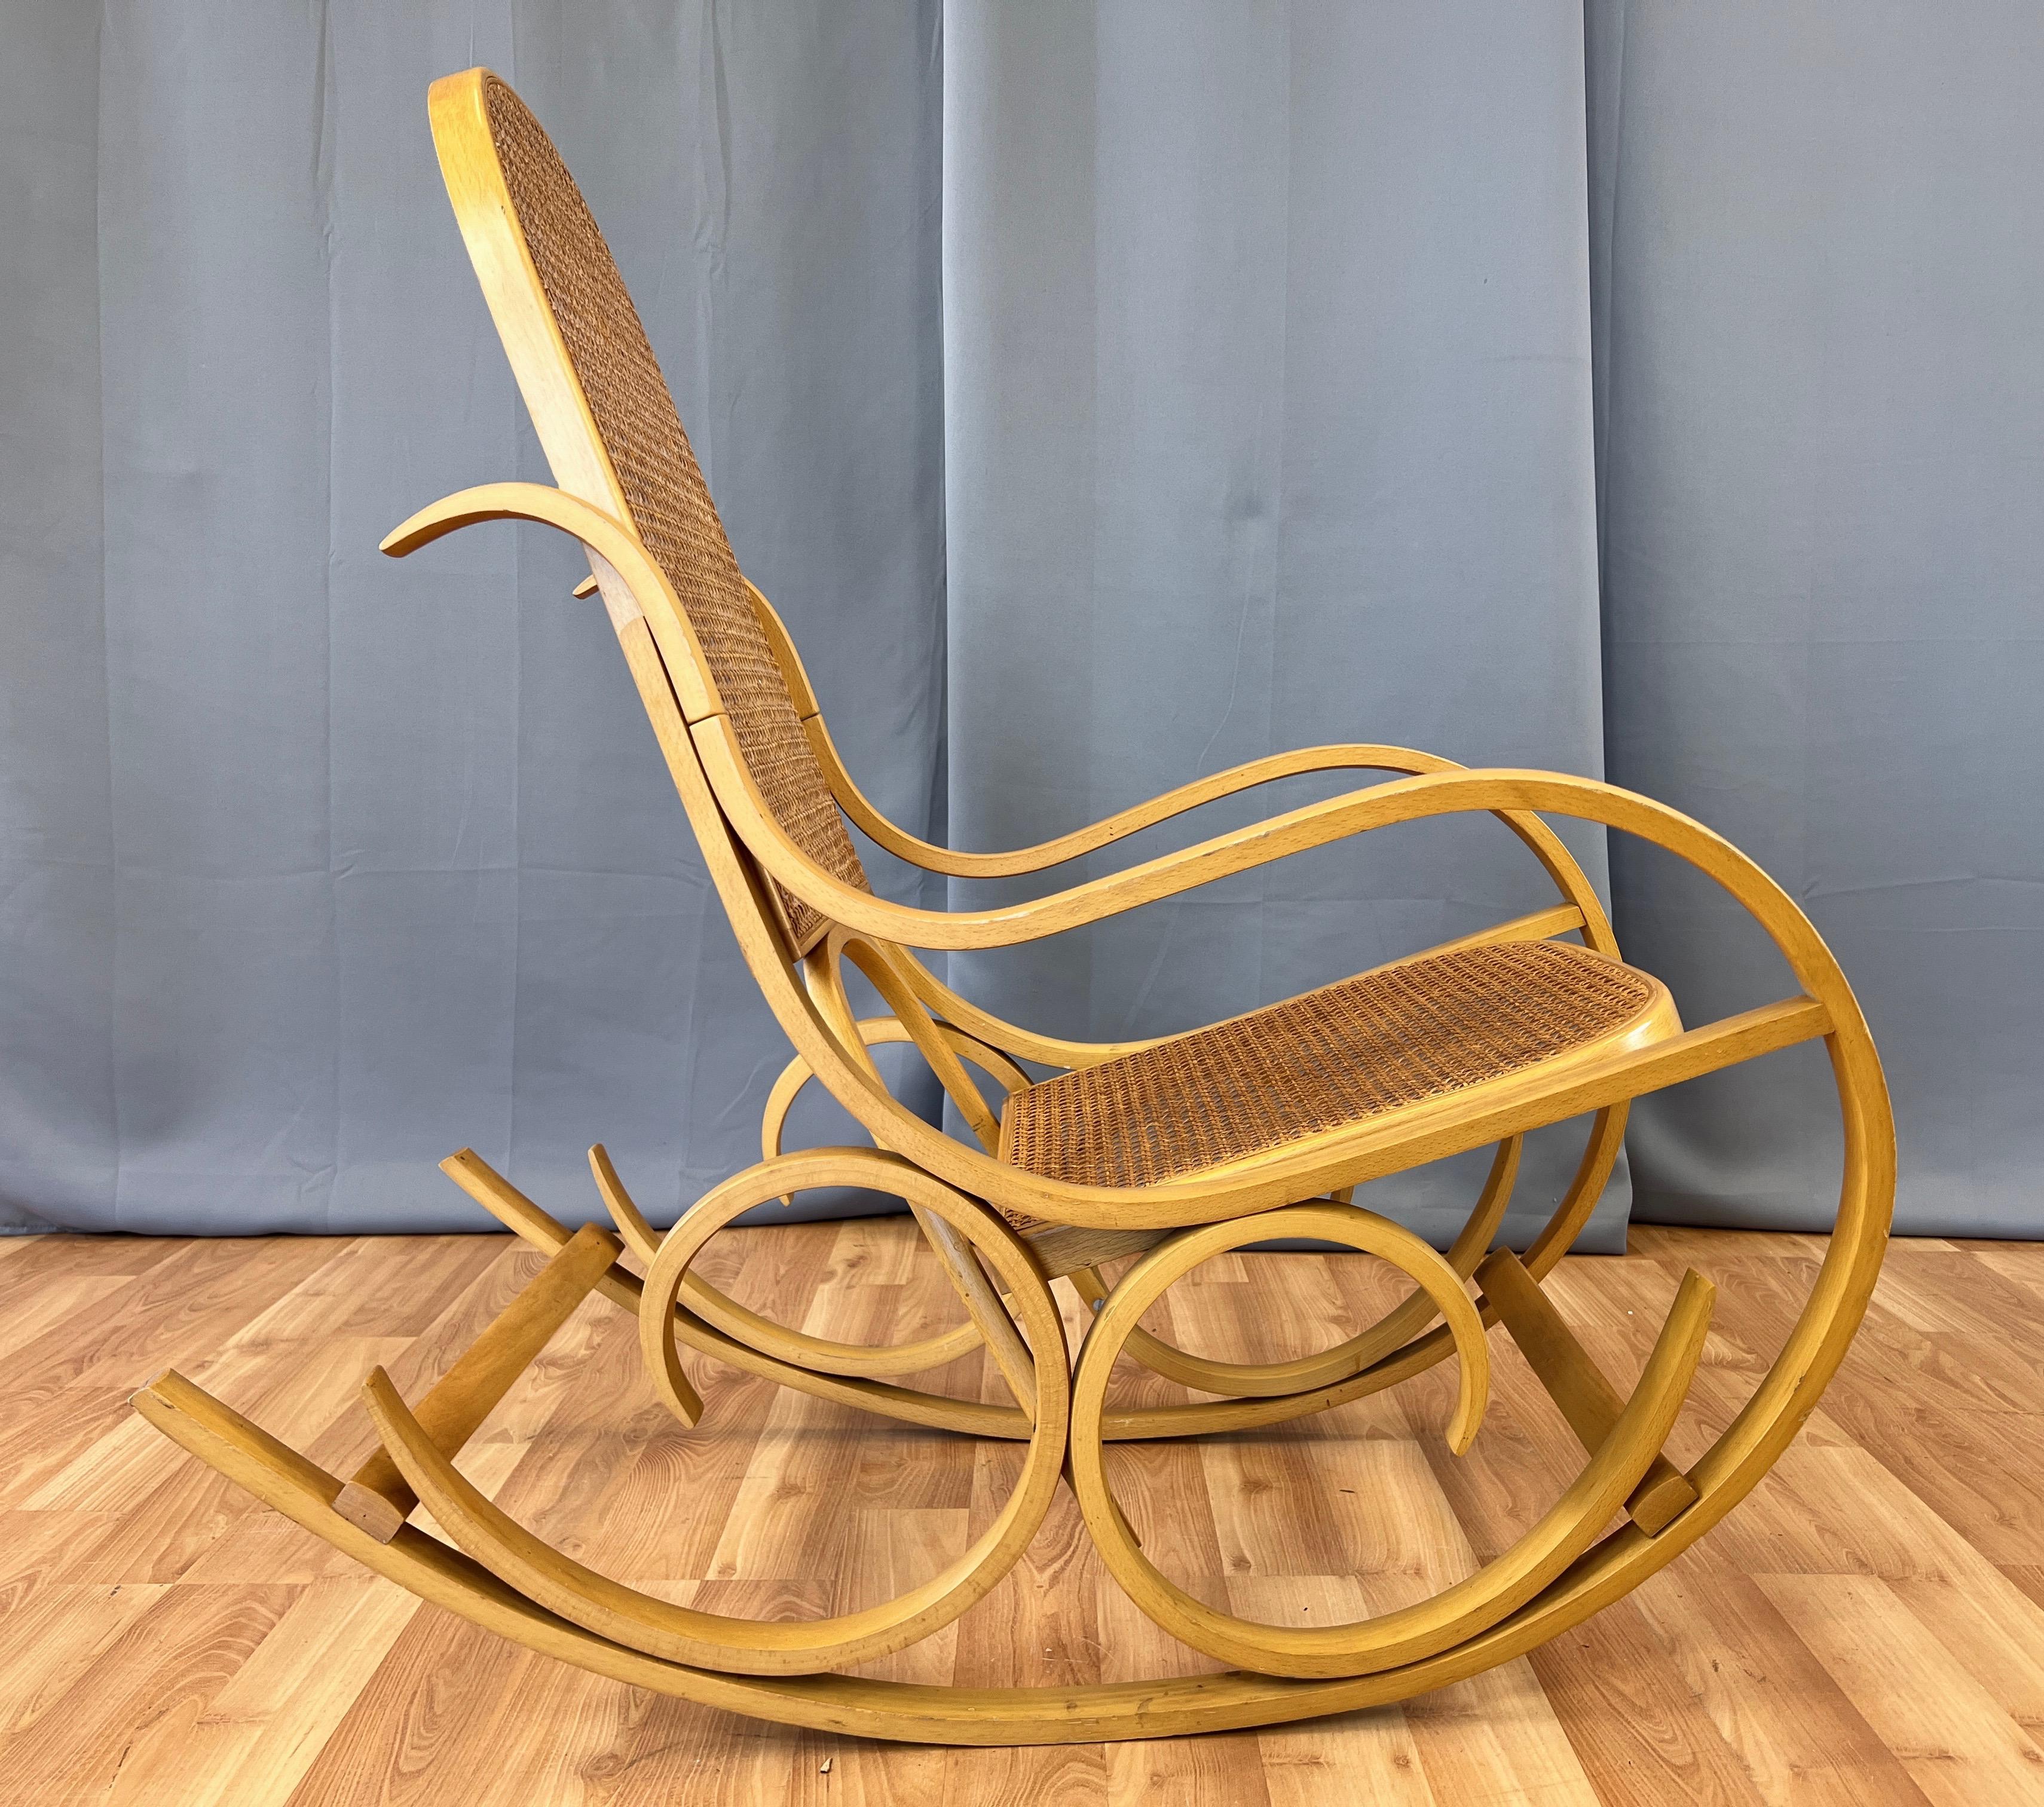 Luigi Crassevig Italian Bentwood Rocking Chair with Woven Cane Seat, 1970s For Sale 1